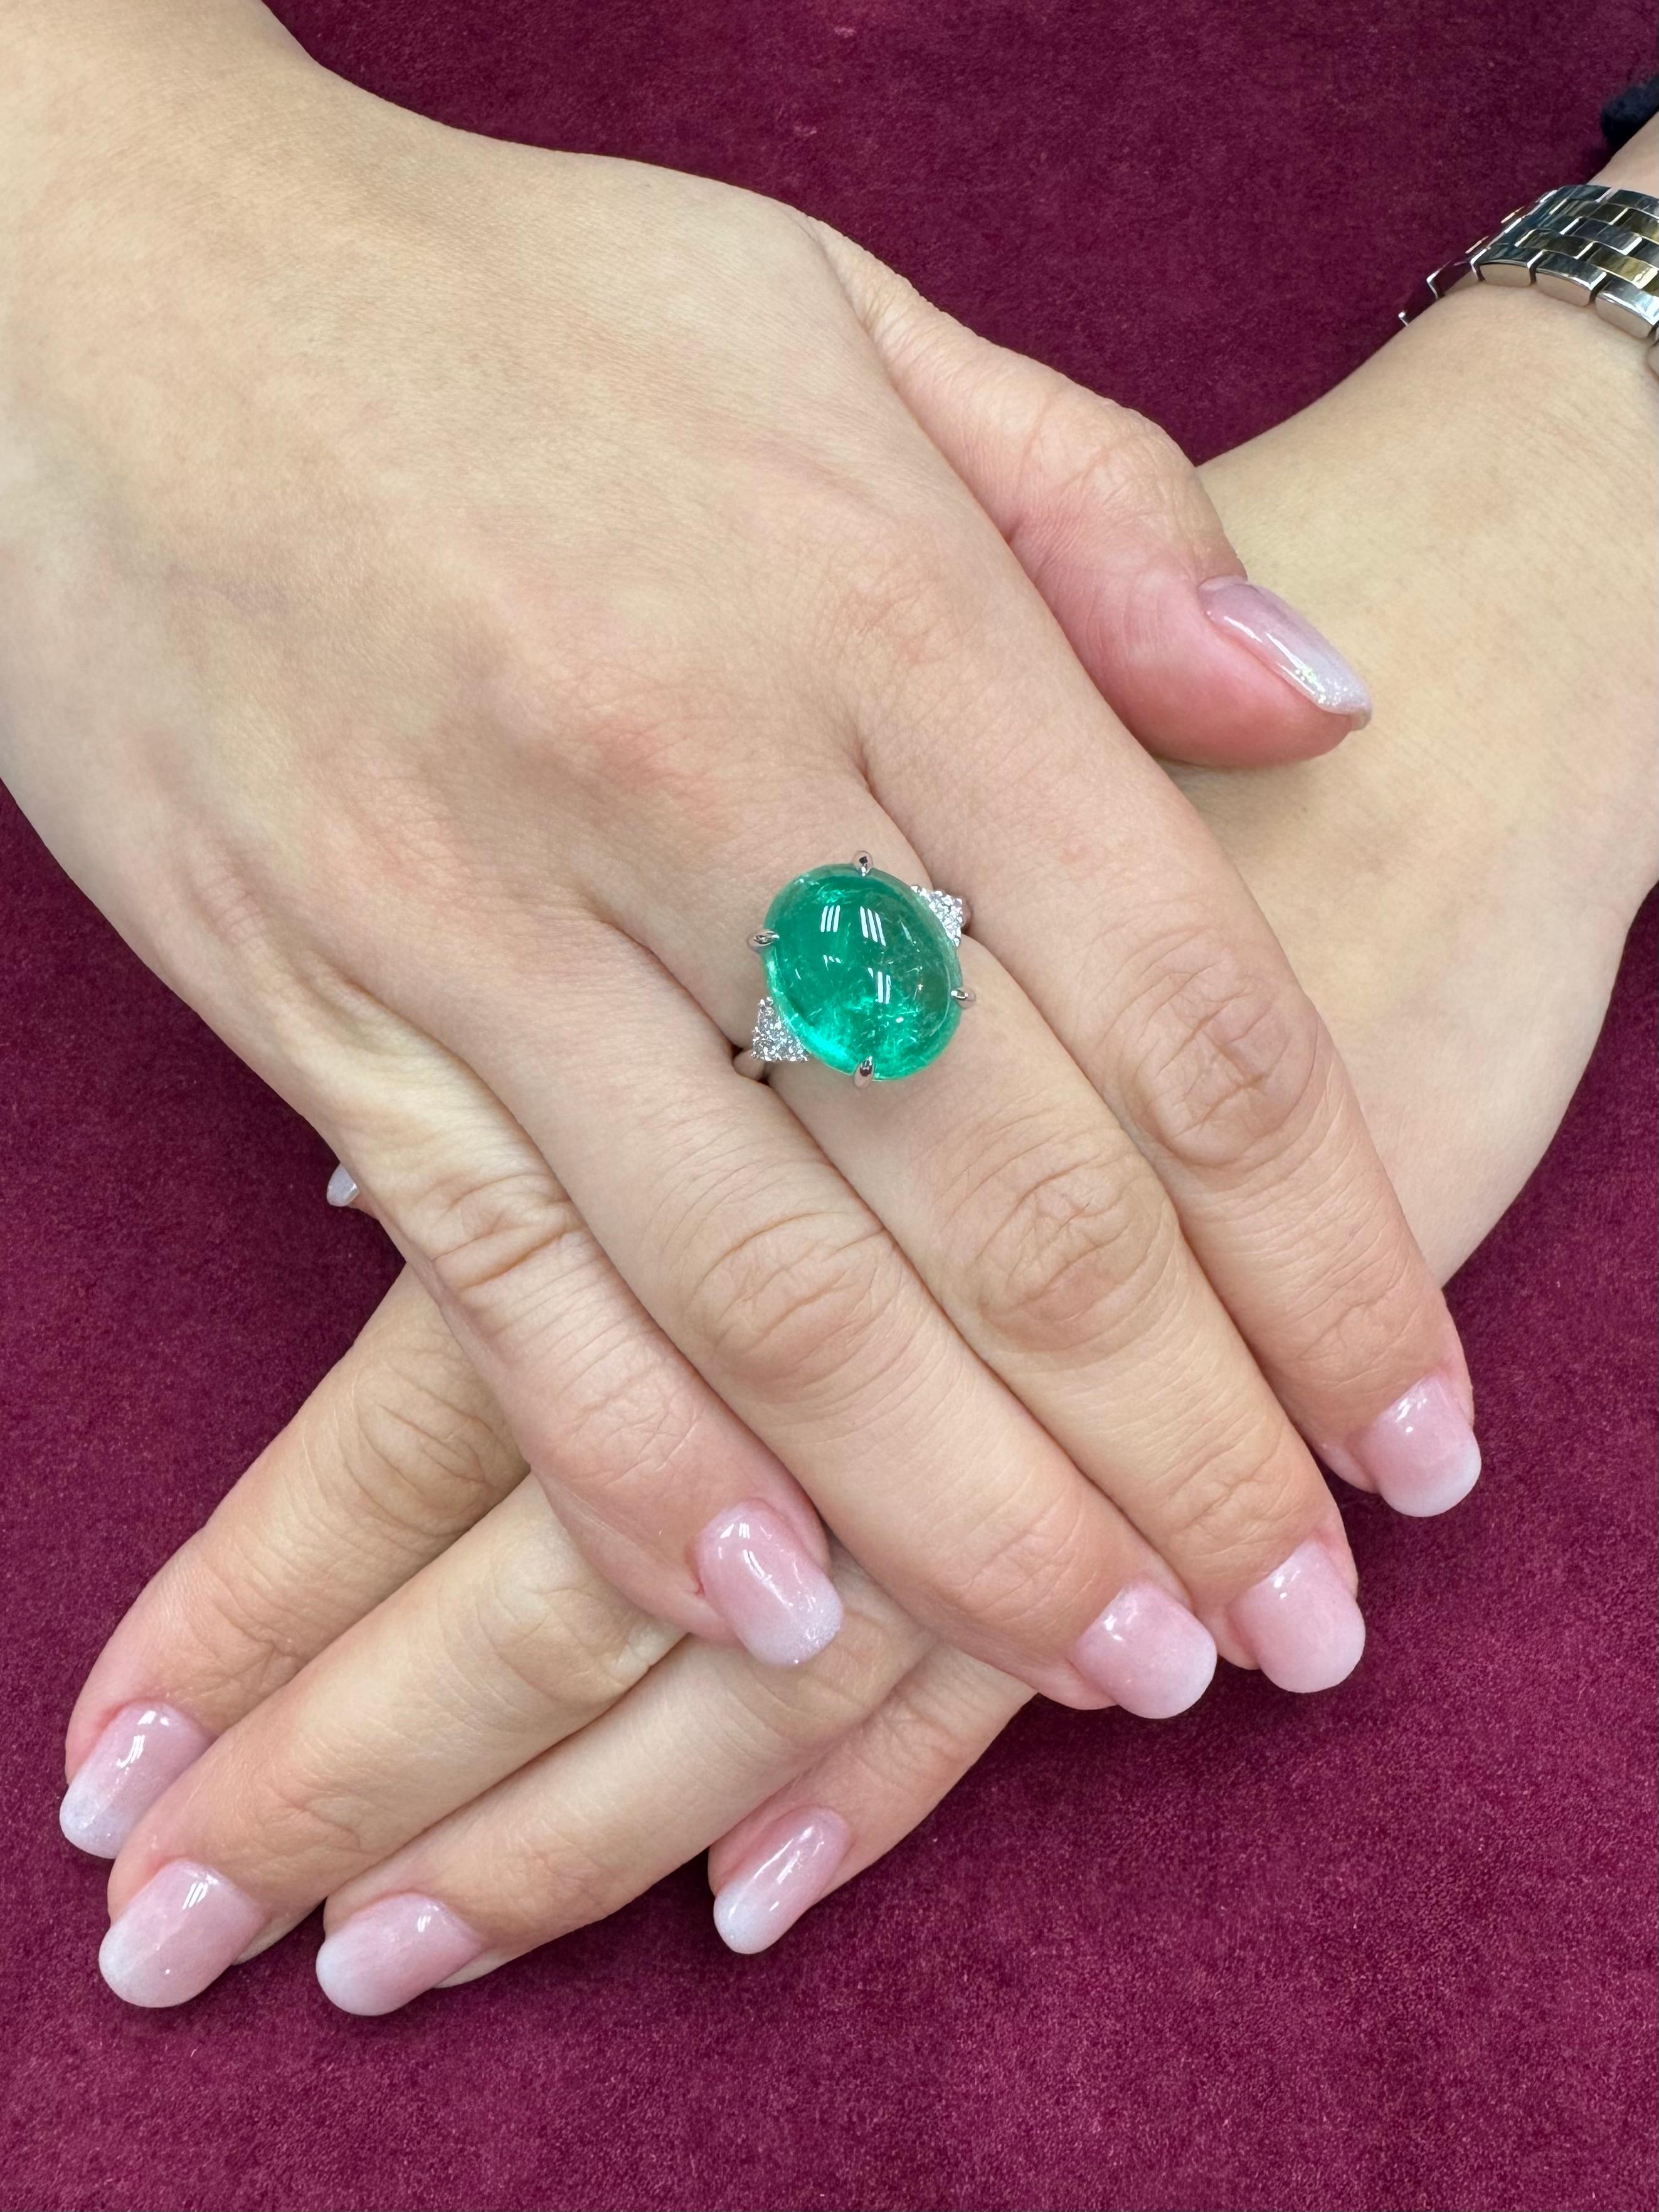 Please check out the HD video! This emerald is certified by GRS lab to be from Colombia. The emerald is large at over 10cts with a very desirable high dome. 99% of emeralds are heavily included and almost all goes through a strong oil treatment.